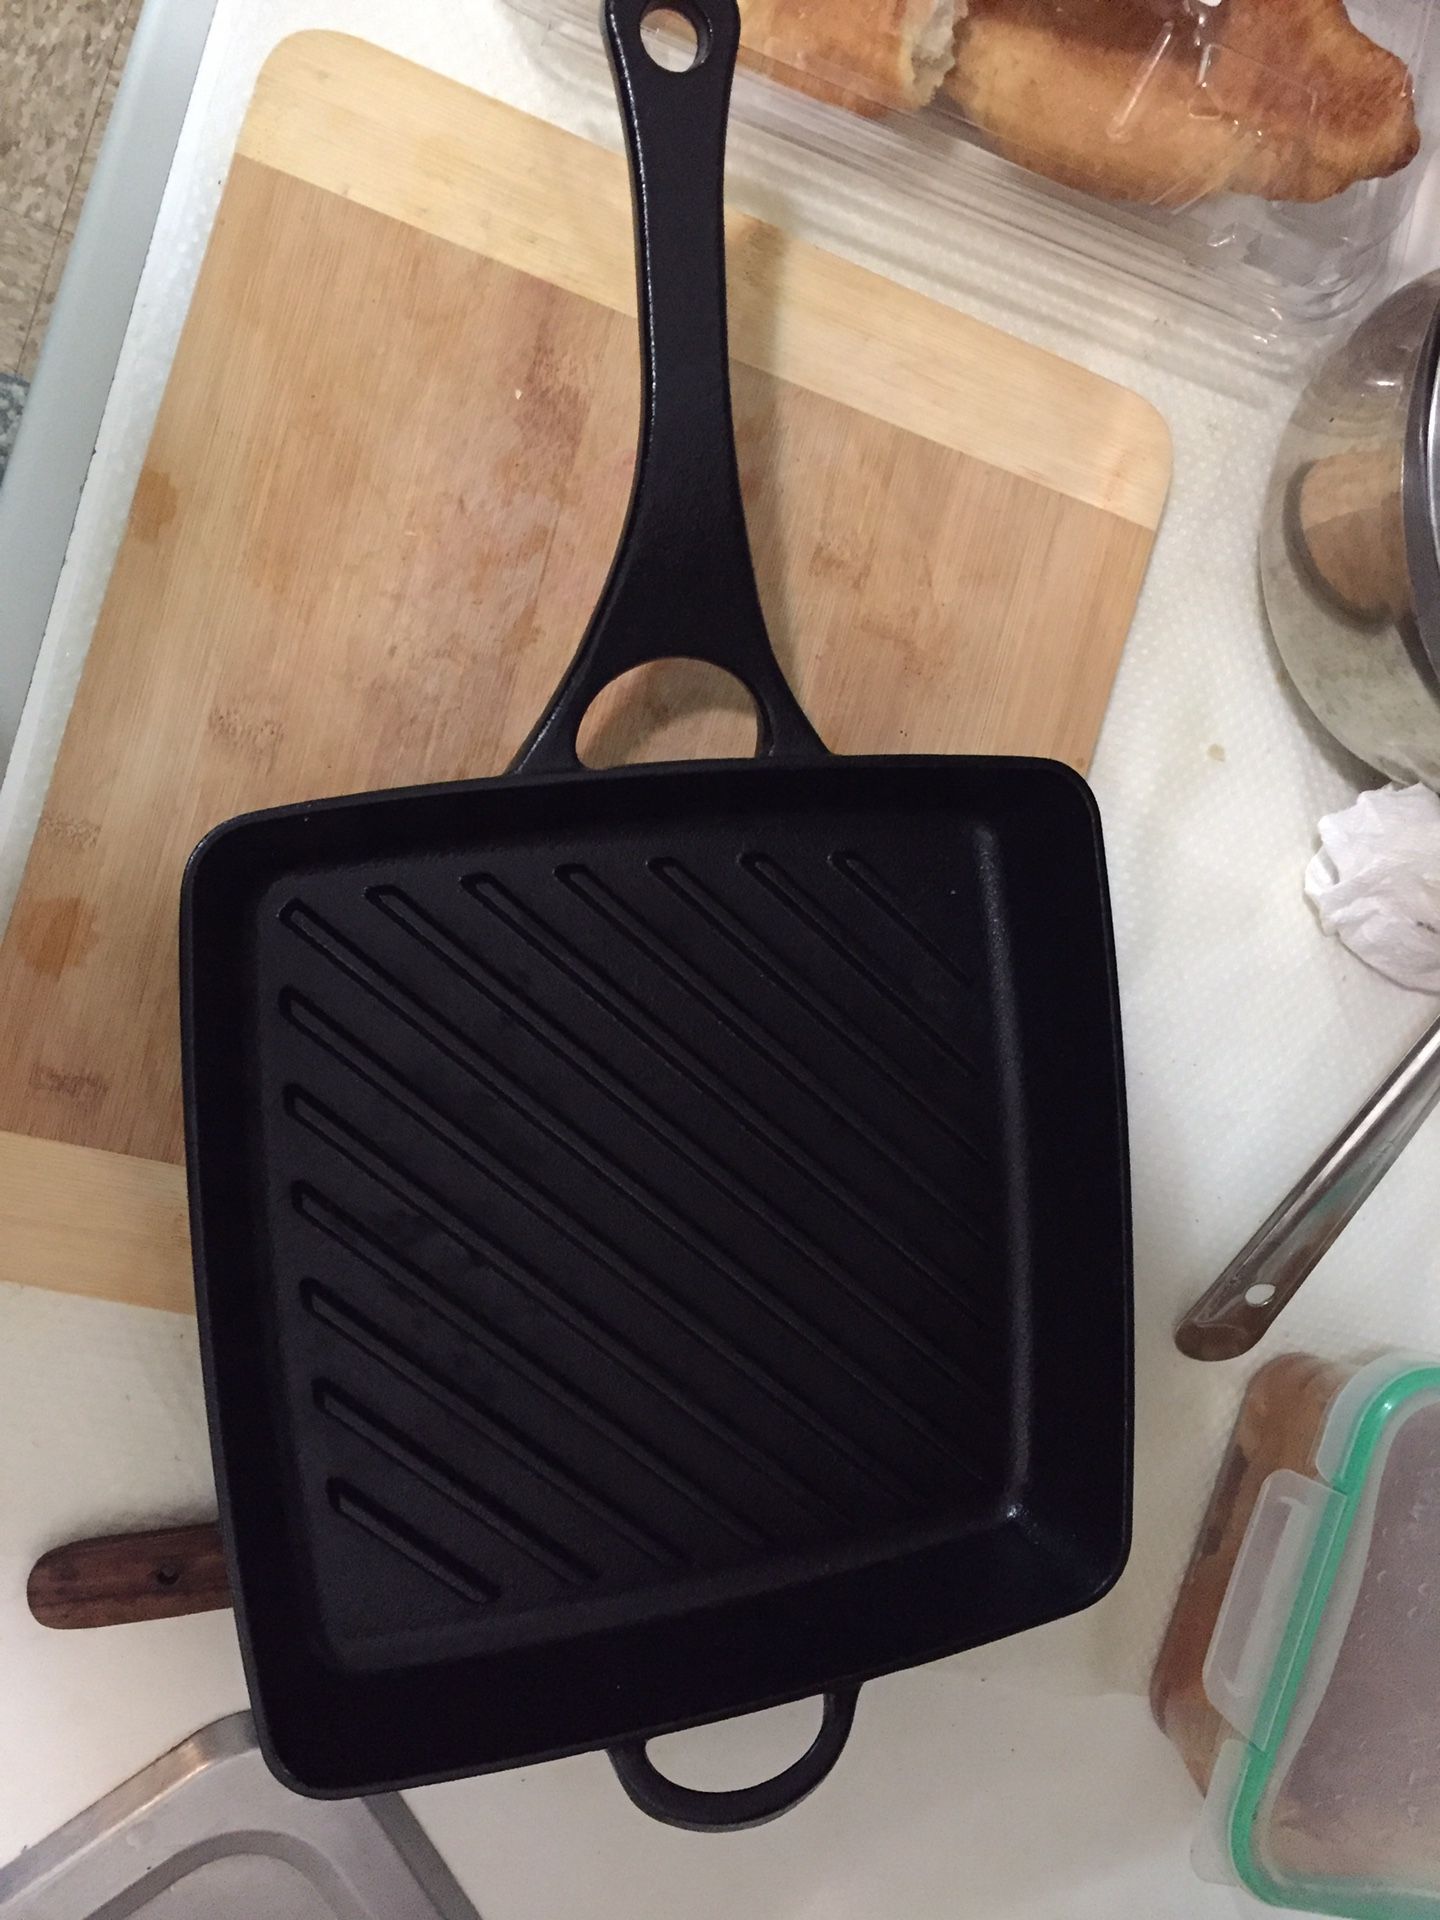 Cooks cast iron grill 11”